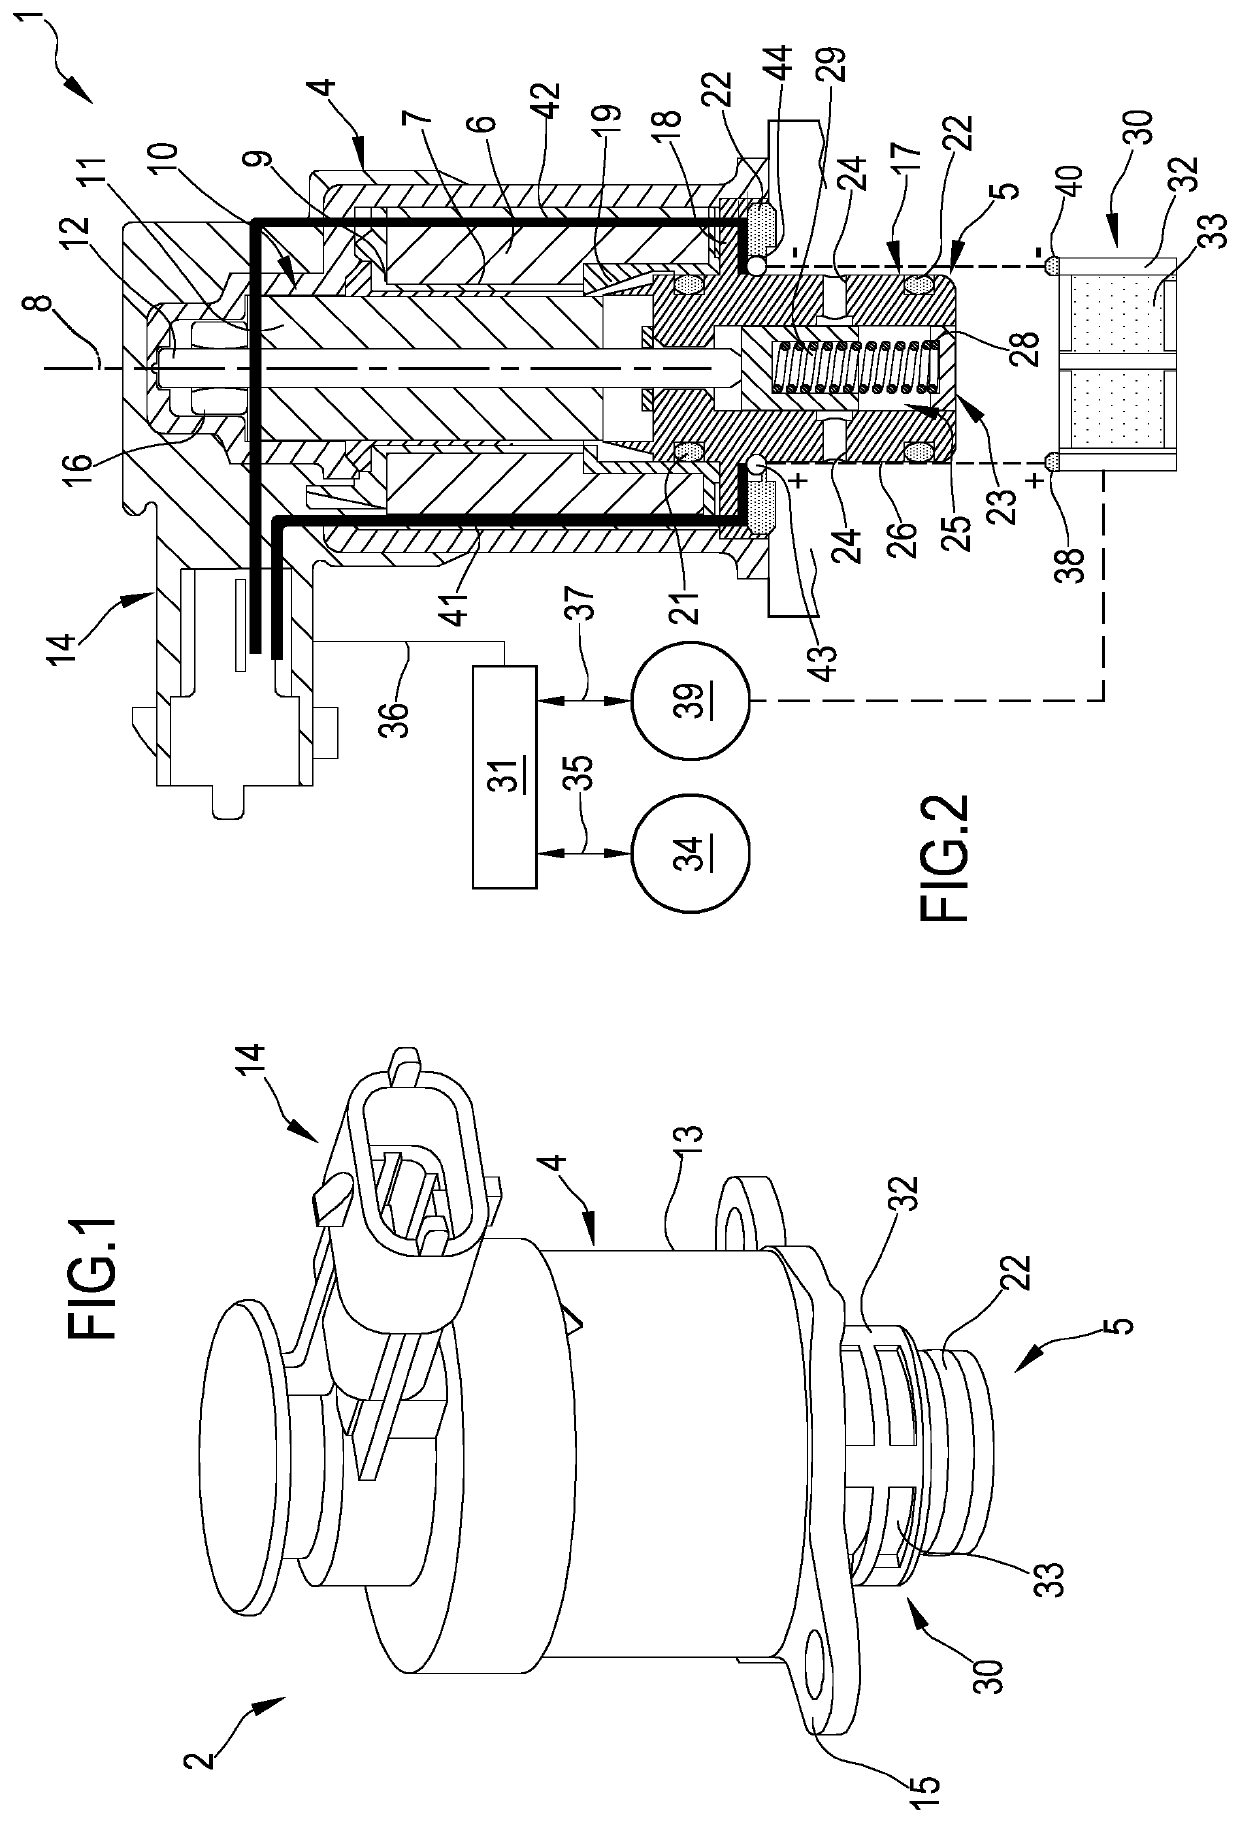 Group and method for unclogging a filter of a pumping group for pumping diesel to an internal combustion engine